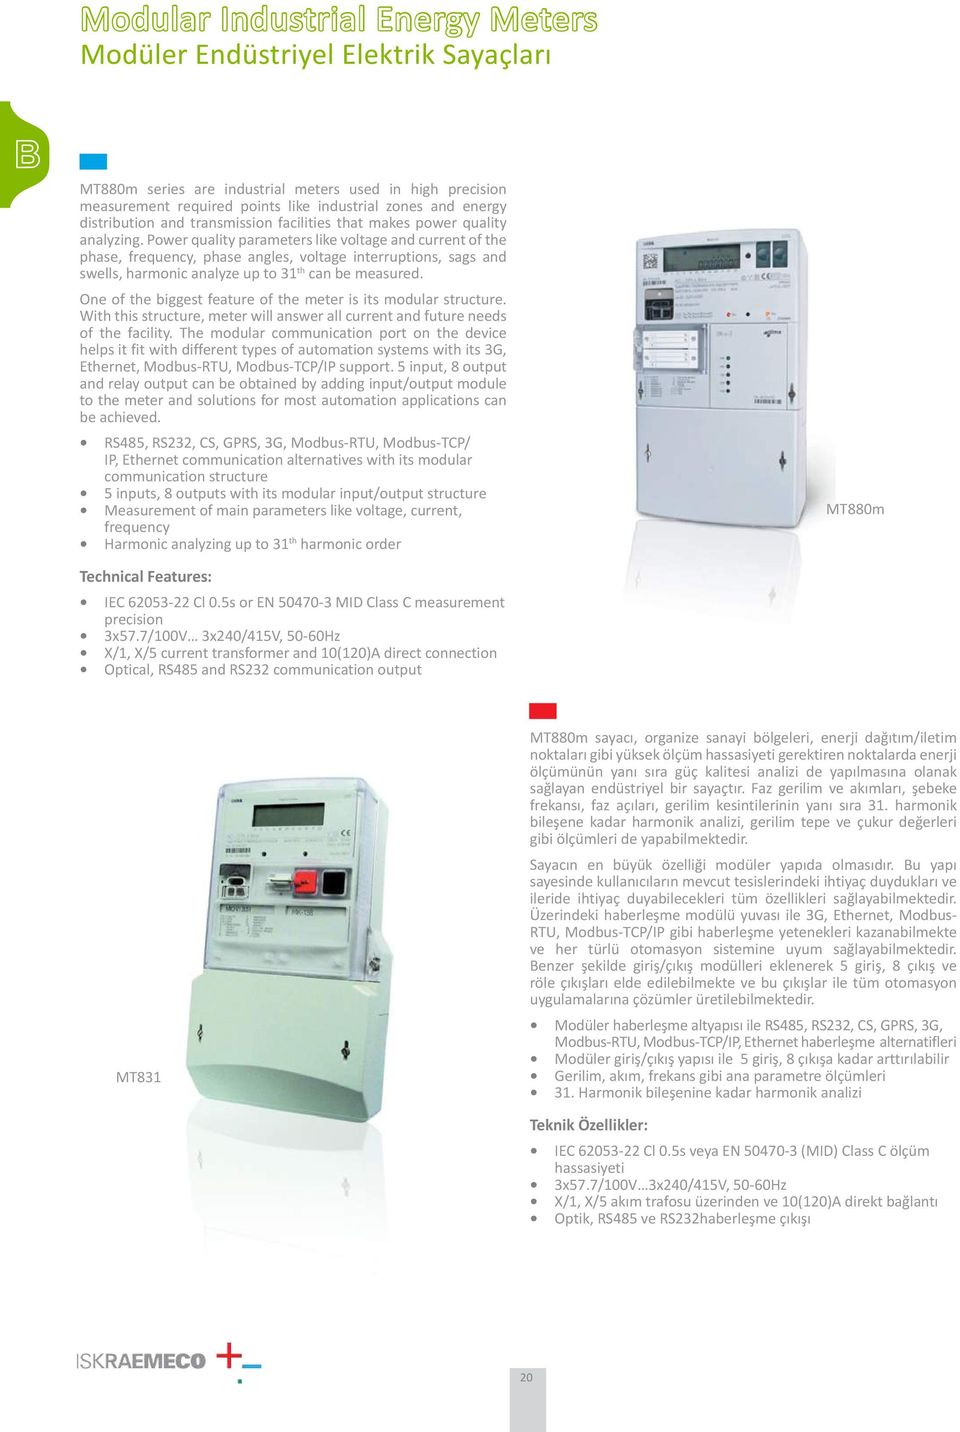 Power quality parameters like voltage and current of the phase, frequency, phase angles, voltage interruptions, sags and swells, harmonic analyze up to 31 th can be measured.